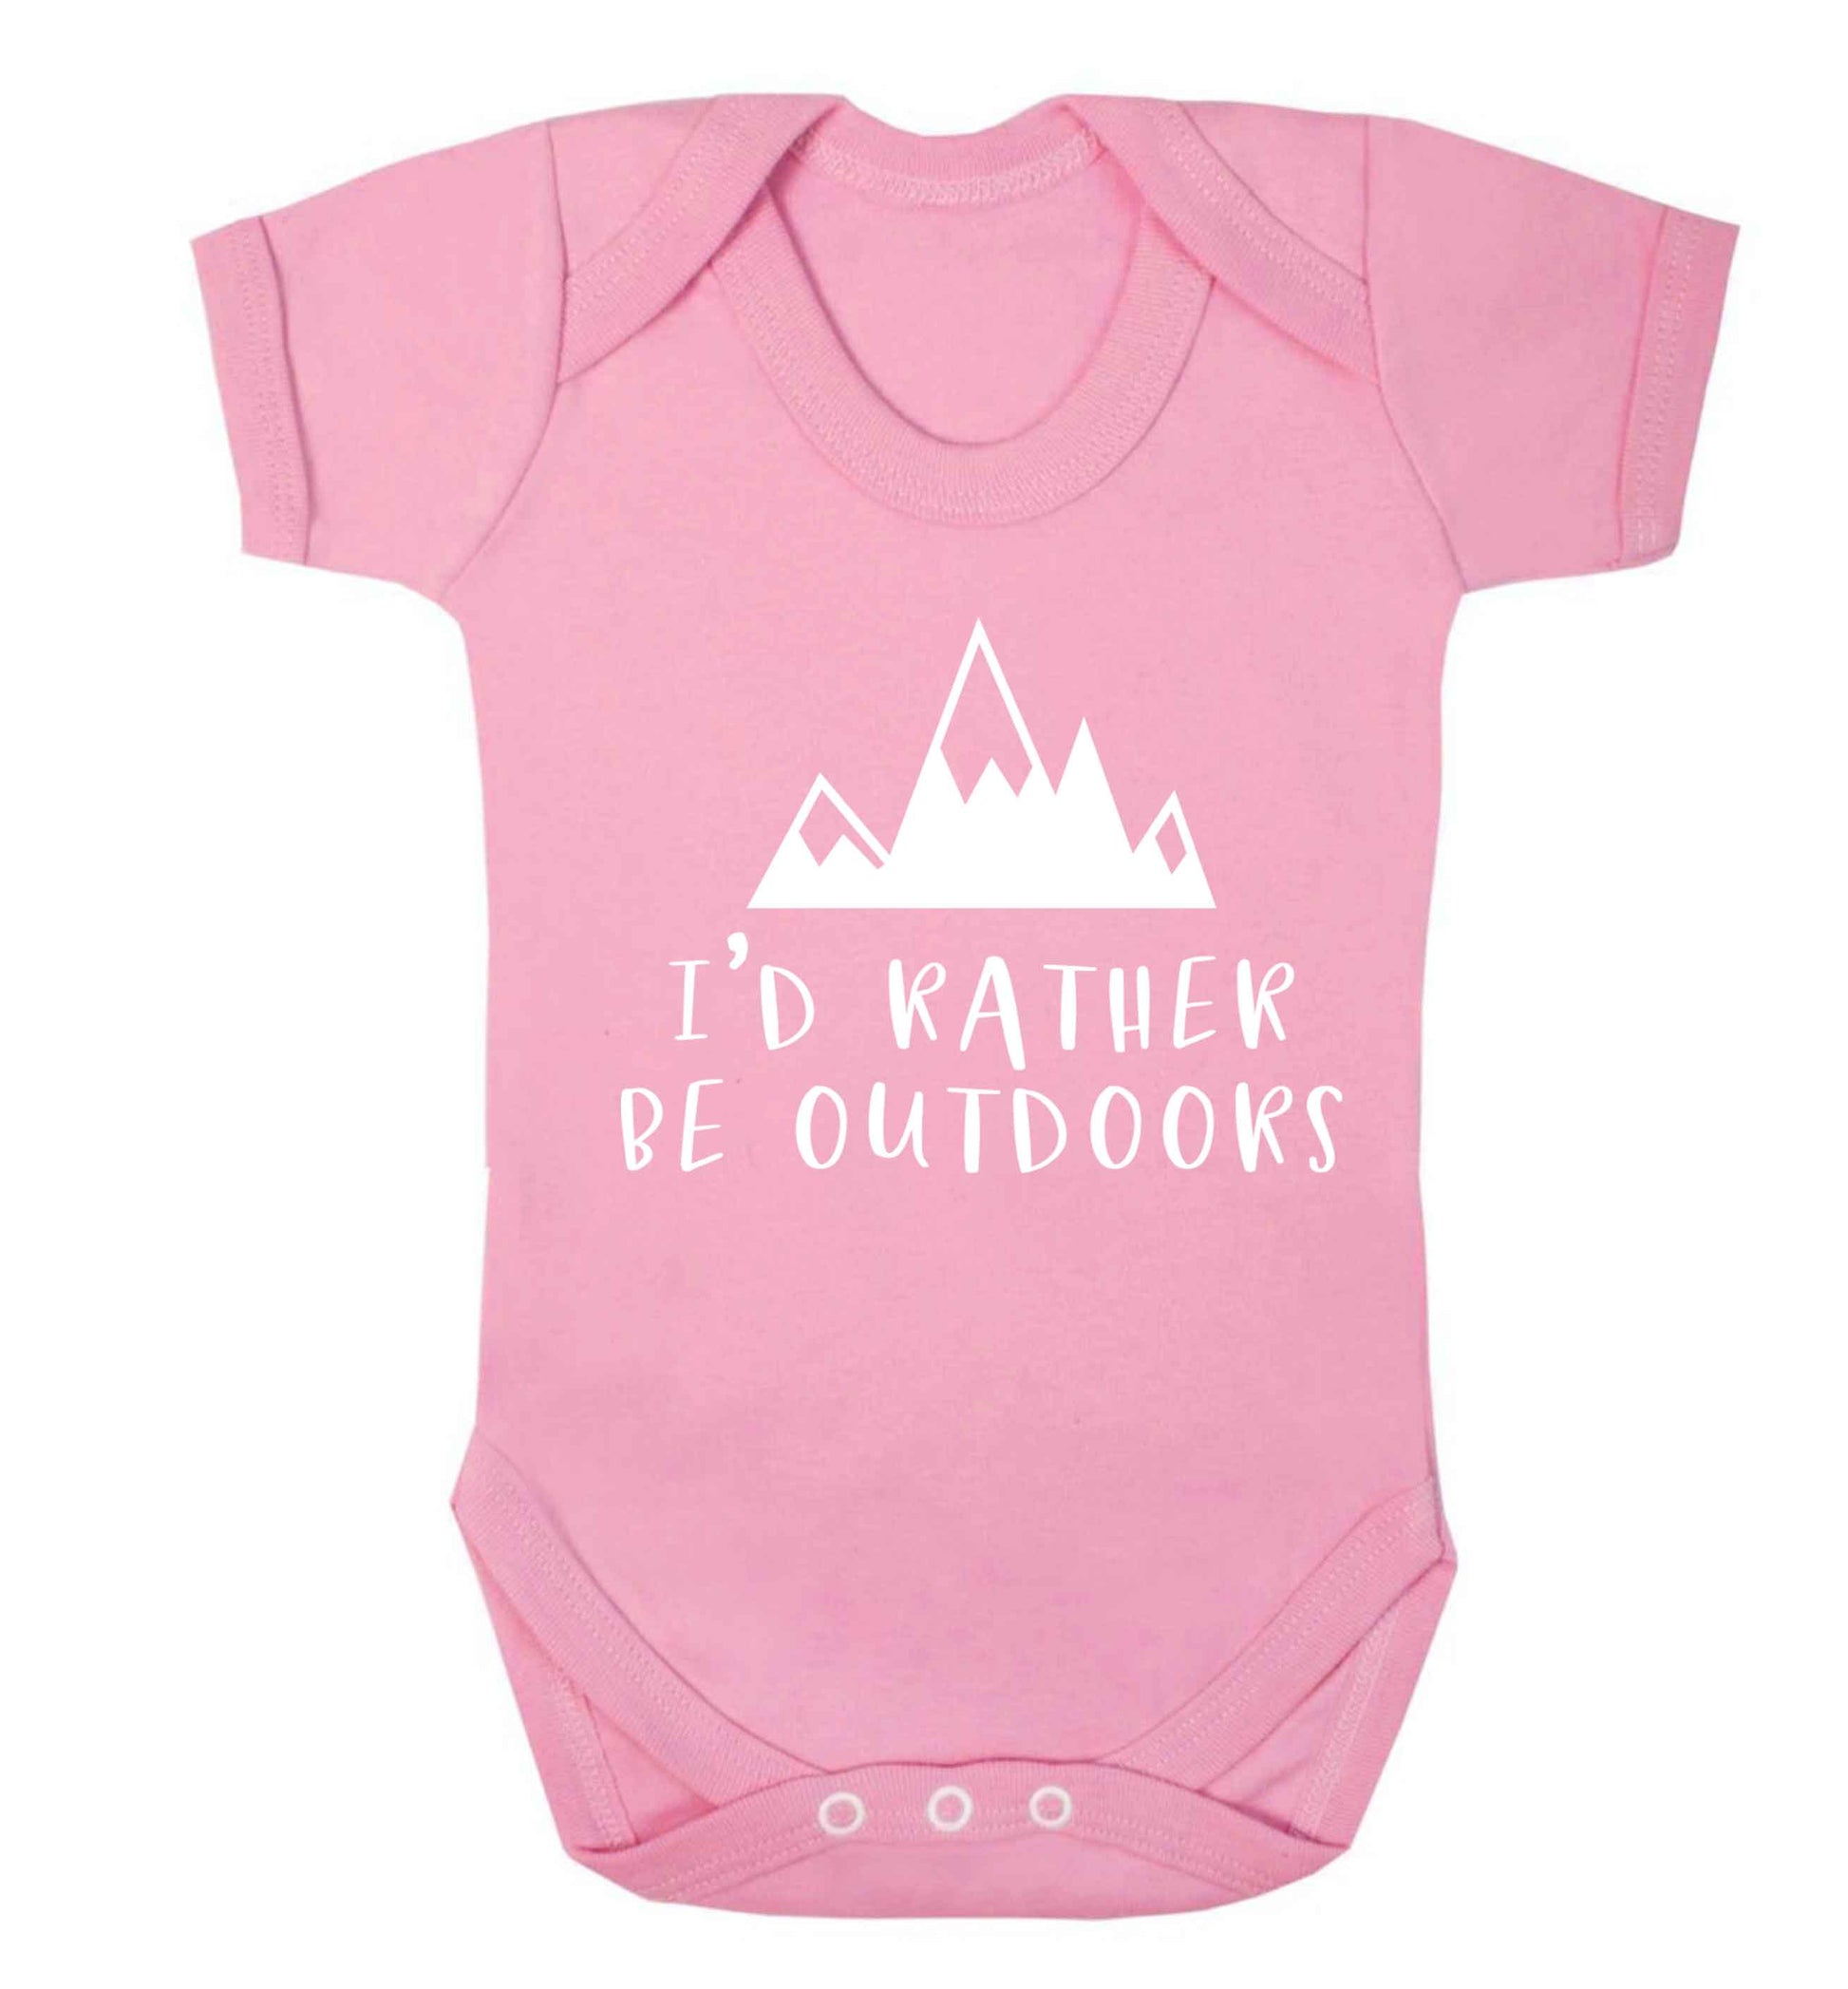 I'd rather be outdoors Baby Vest pale pink 18-24 months